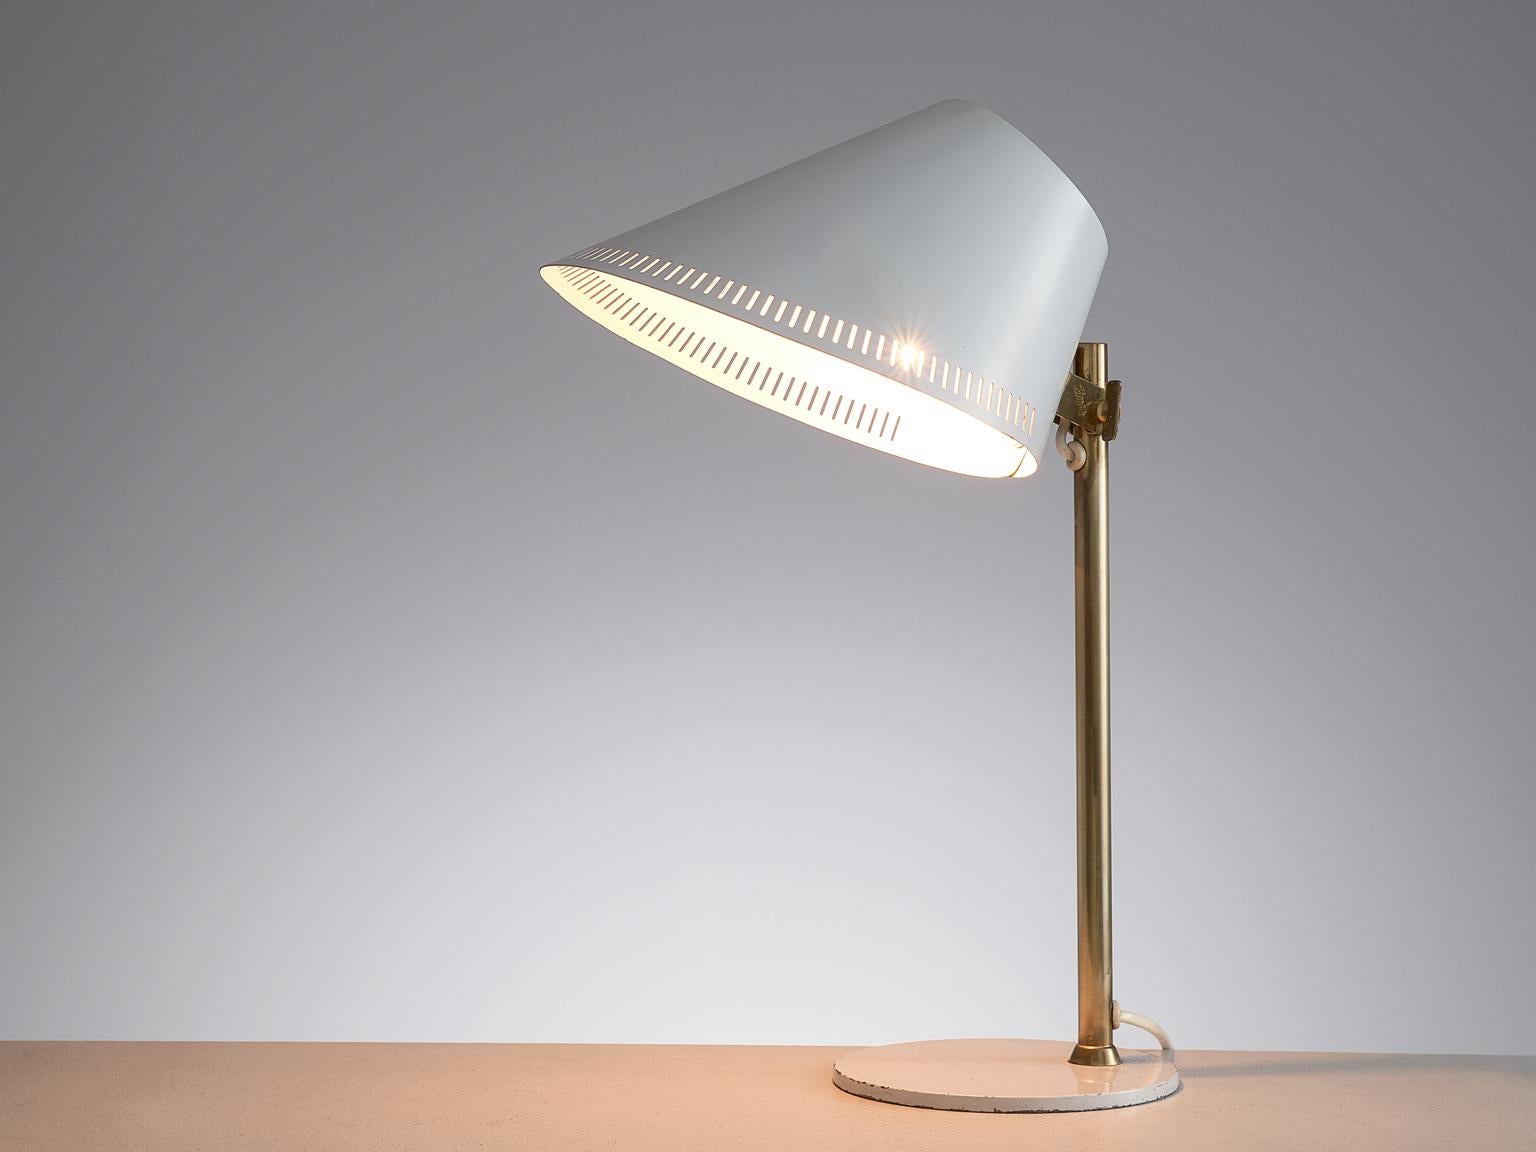 Paavo Tynell for Idman, desk lamp, model 9227, white enameled metal, coated aluminum, and brass, Finland, 1950s.

Beautiful designed '9227' table lamp by Finnish designer Paavo Tynell for Idman. This model features a very refined design that shows